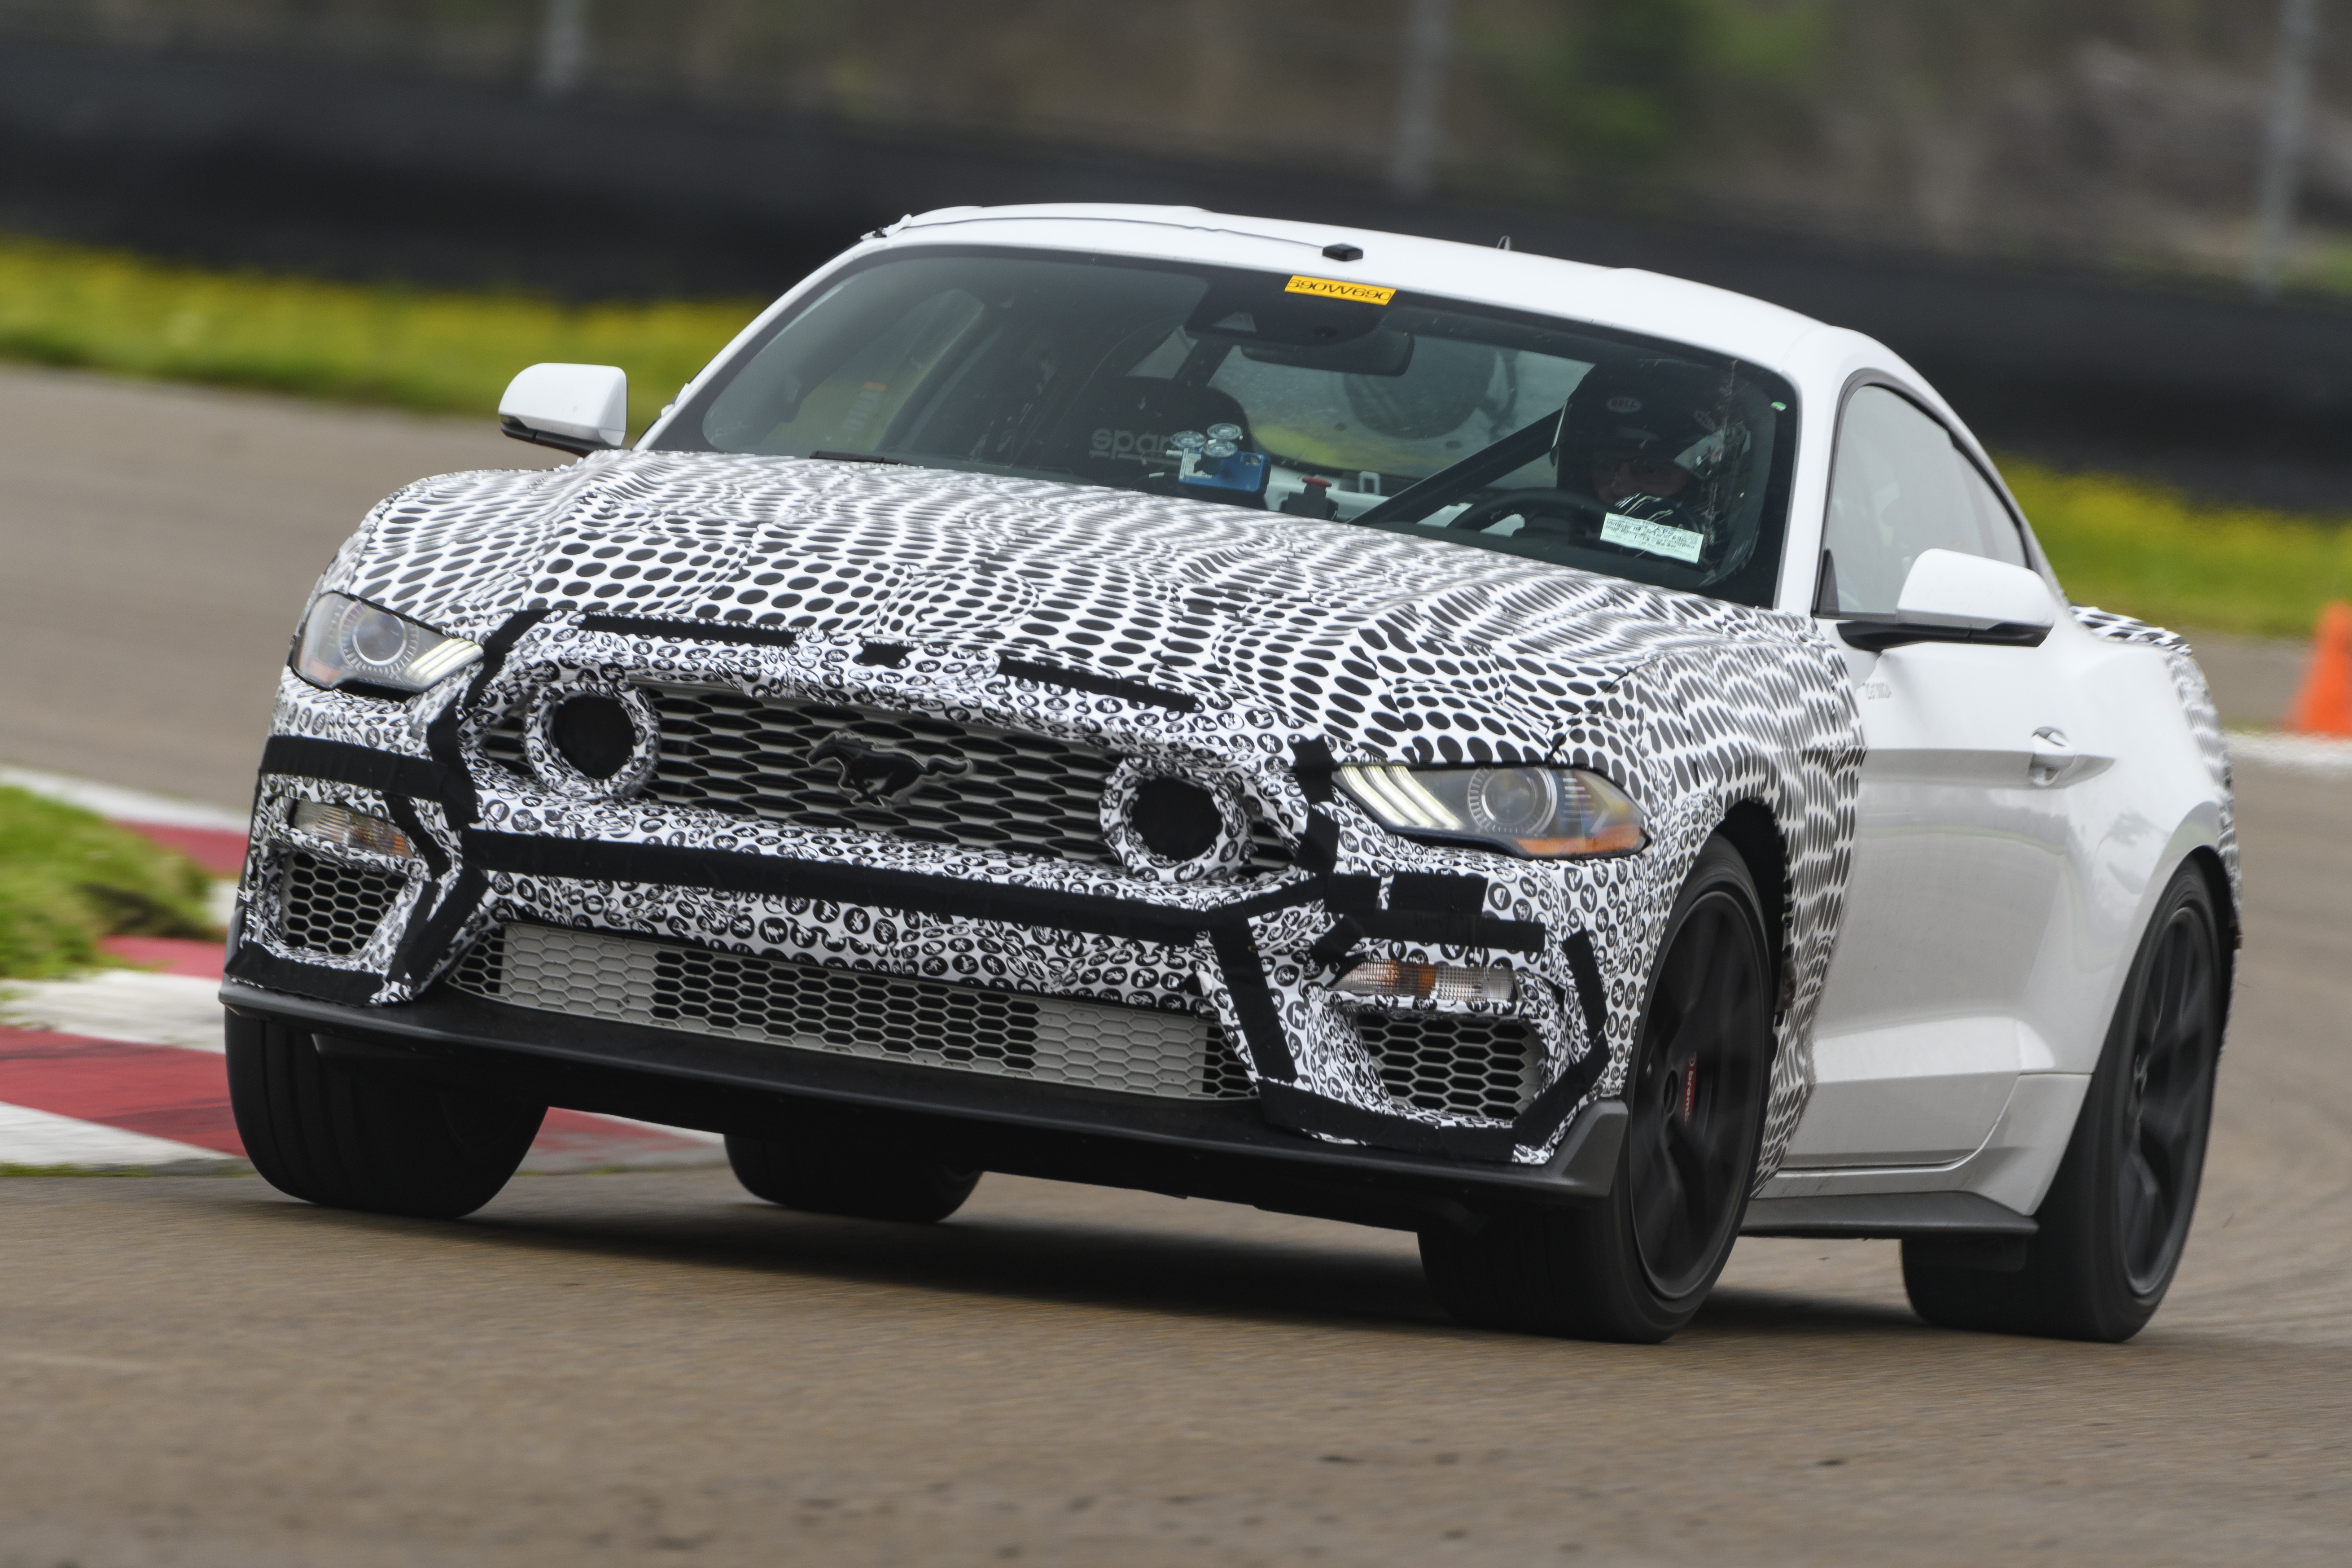 2021 Ford Mustang Mach 1 Set for Spring Debut